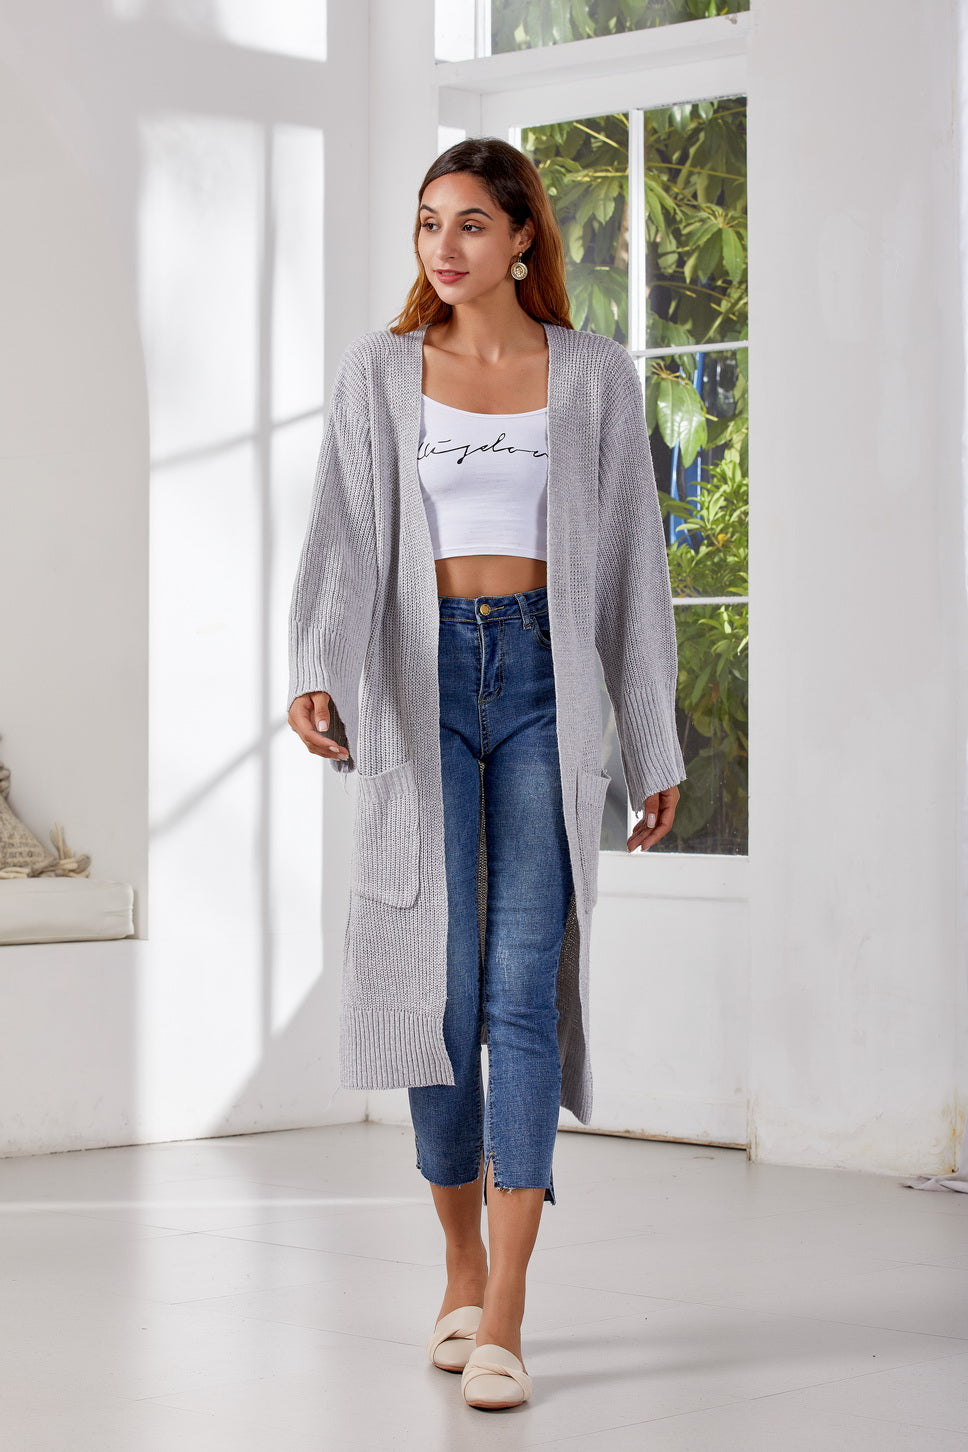 Women's Autumn/Winter Casual Long Knitted Cardigan